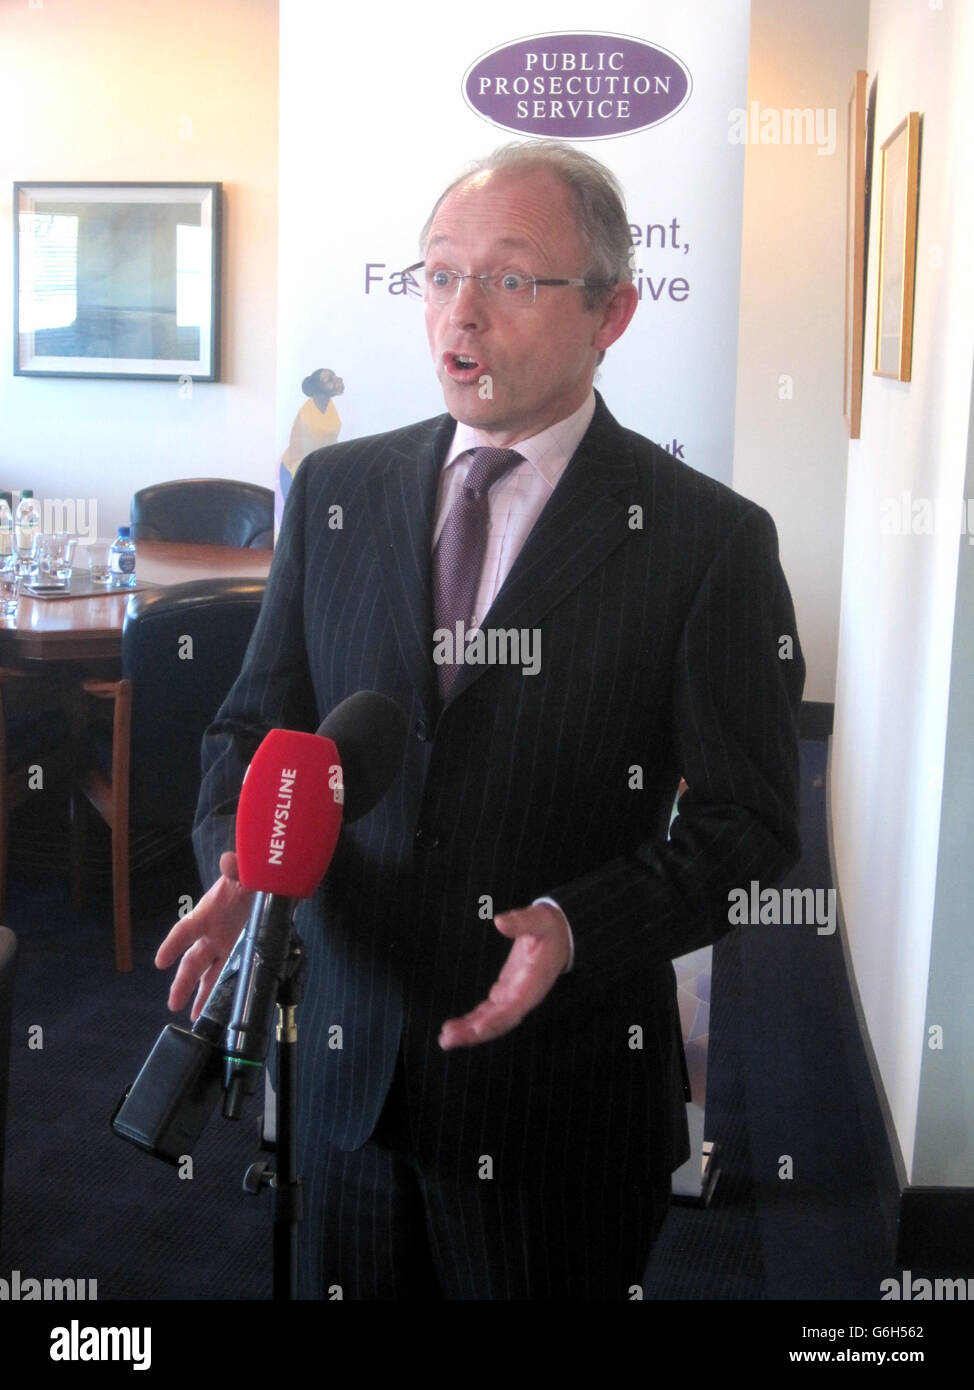 Director of Public Prosecutions in Northern Ireland Barra McGrory speaking to the media in his office in Belfast where he addressed confusion surrounding controversial draft abortion guidelines in the region by insisting it is not a crime to assist a woman going elsewhere in the UK for a termination. Stock Photo